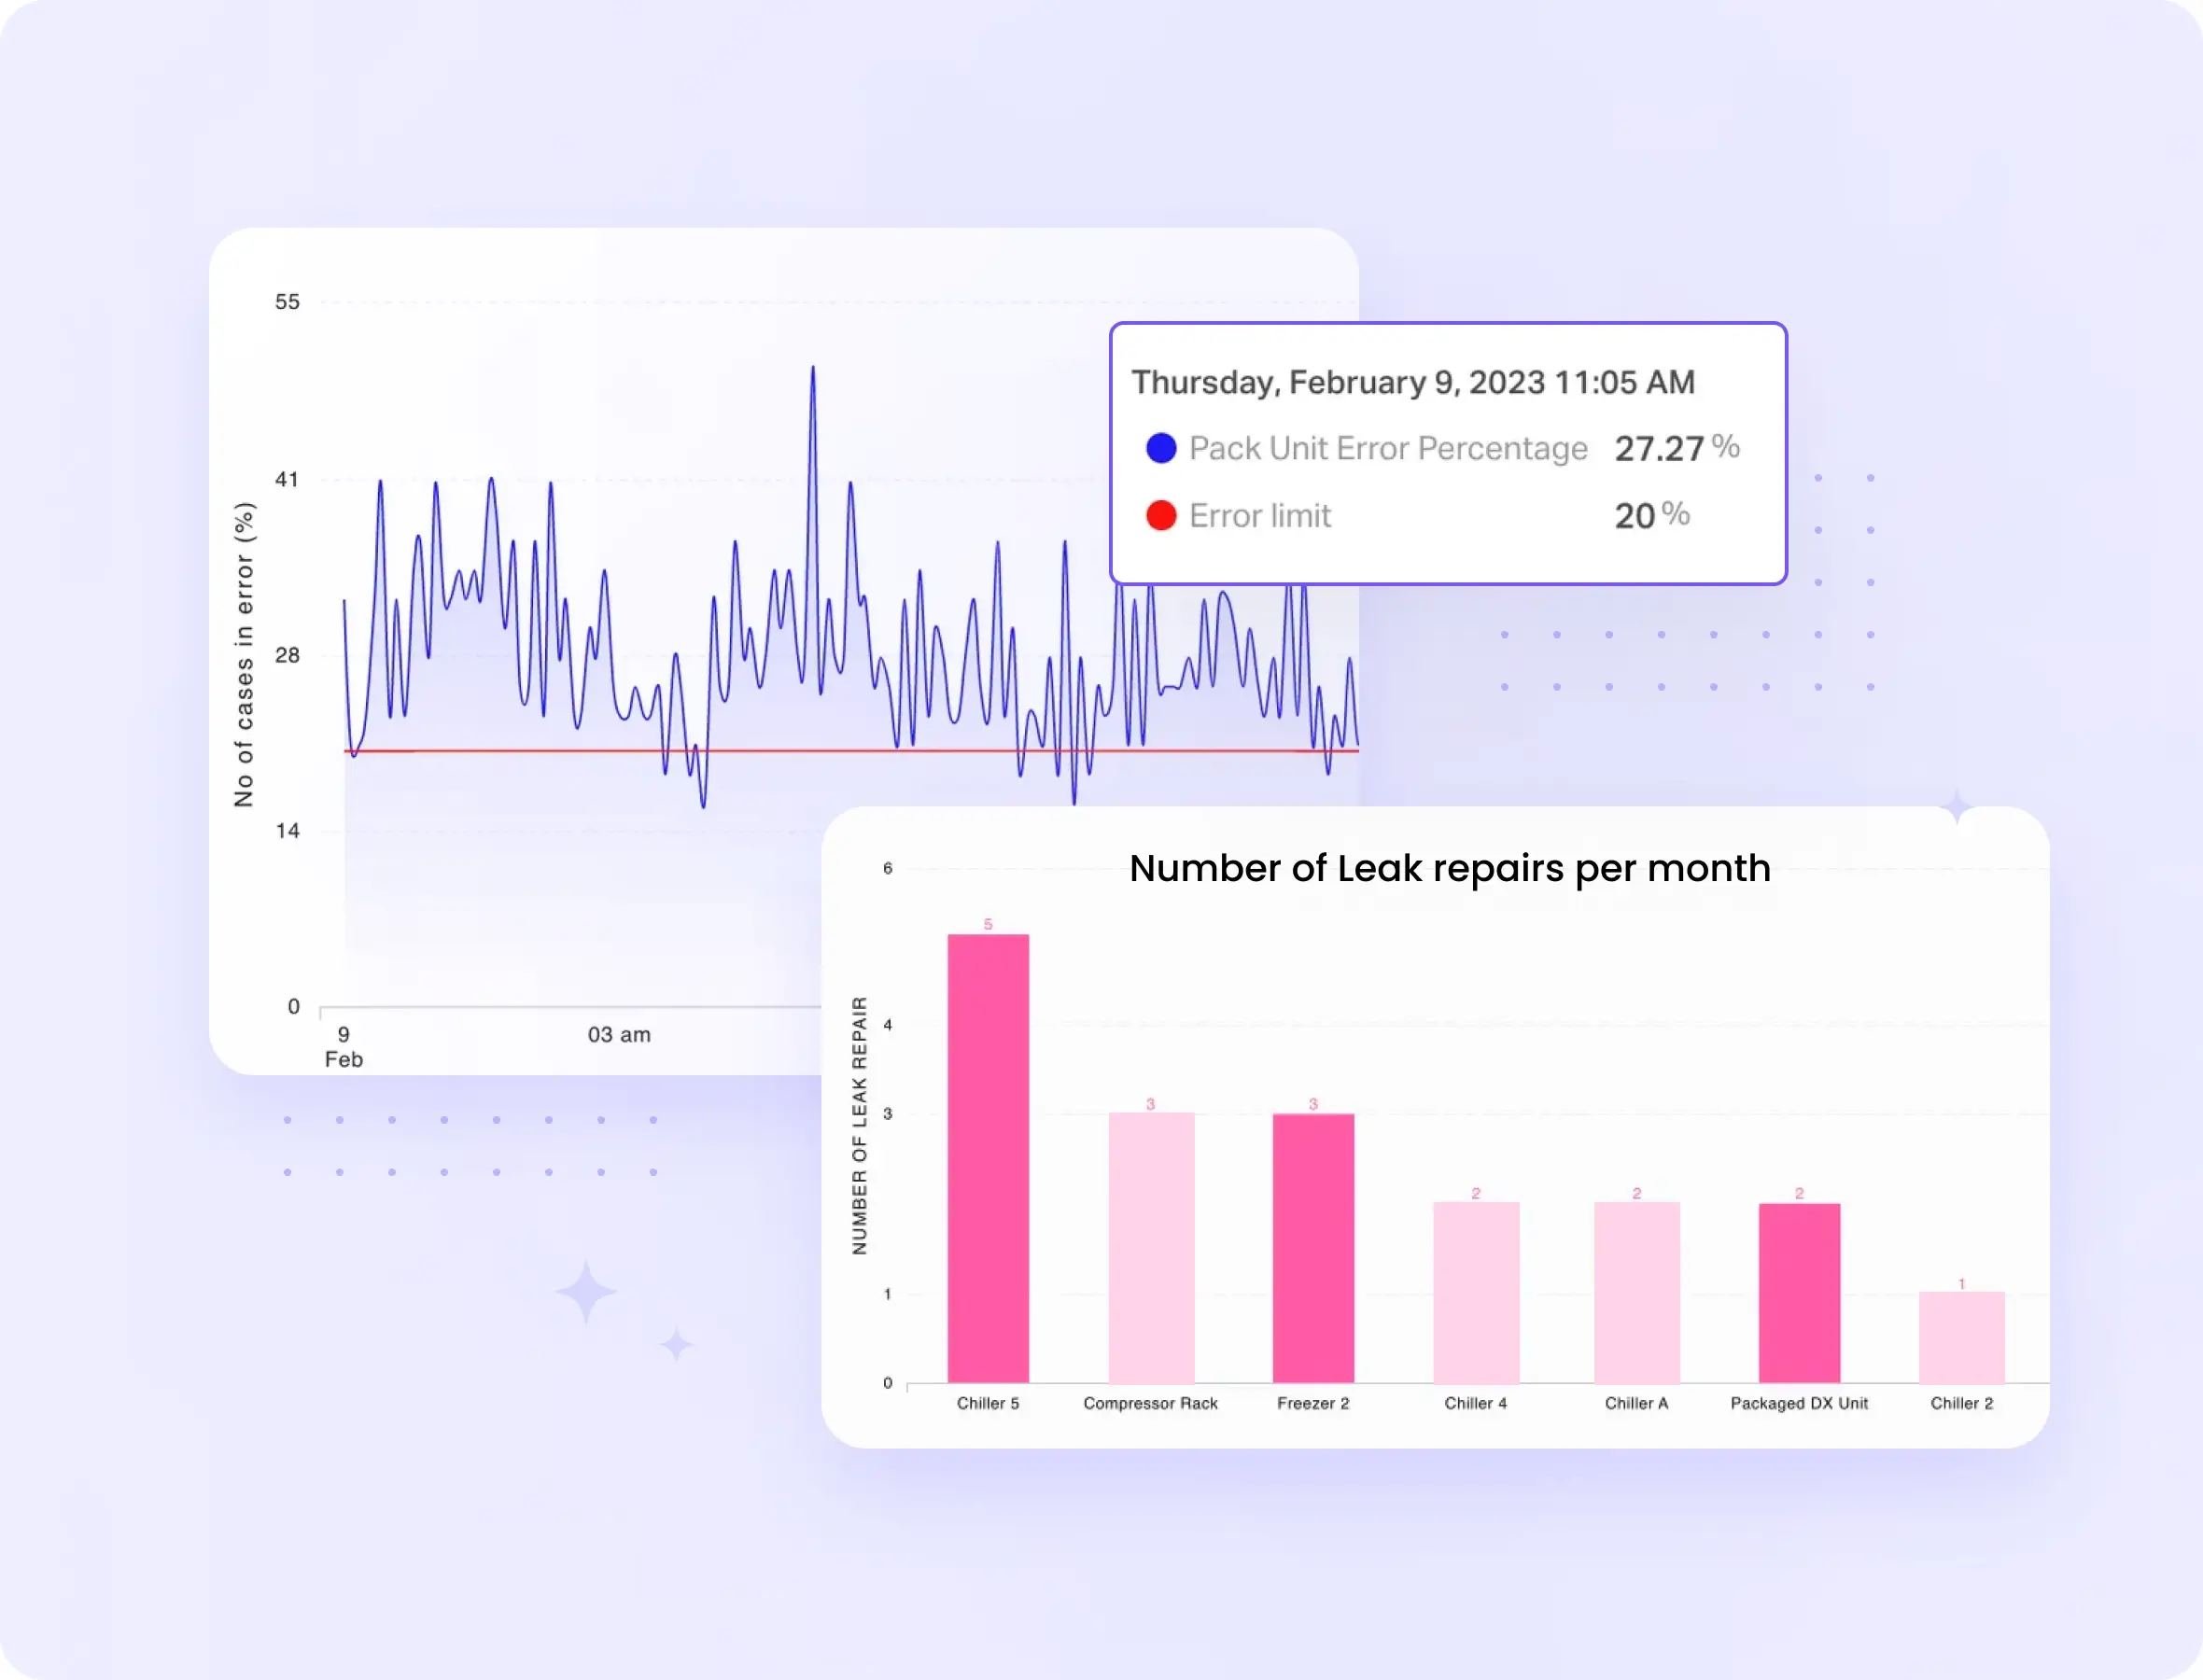 Track asset health and performance in real time with detailed reports on leaks for any time period